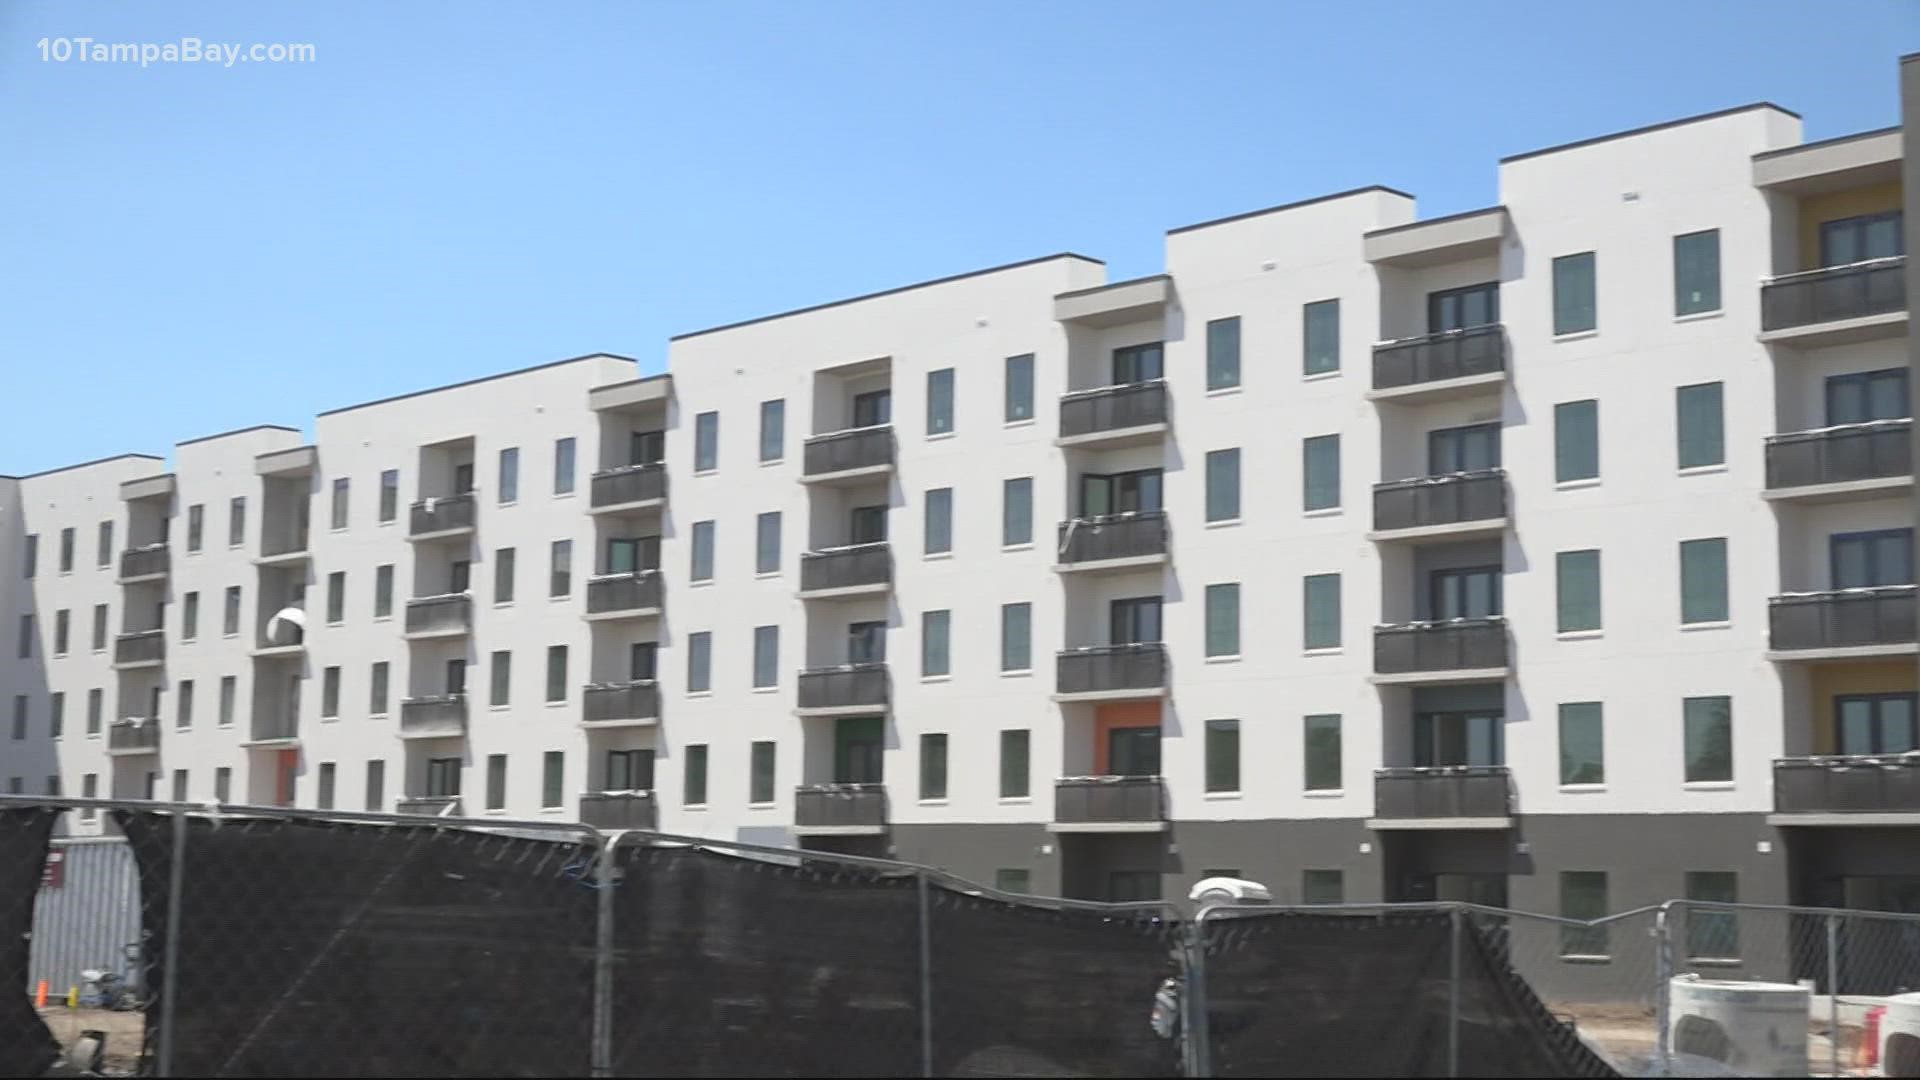 Commissioners voted 5-0 to approve $20 million for housing projects.